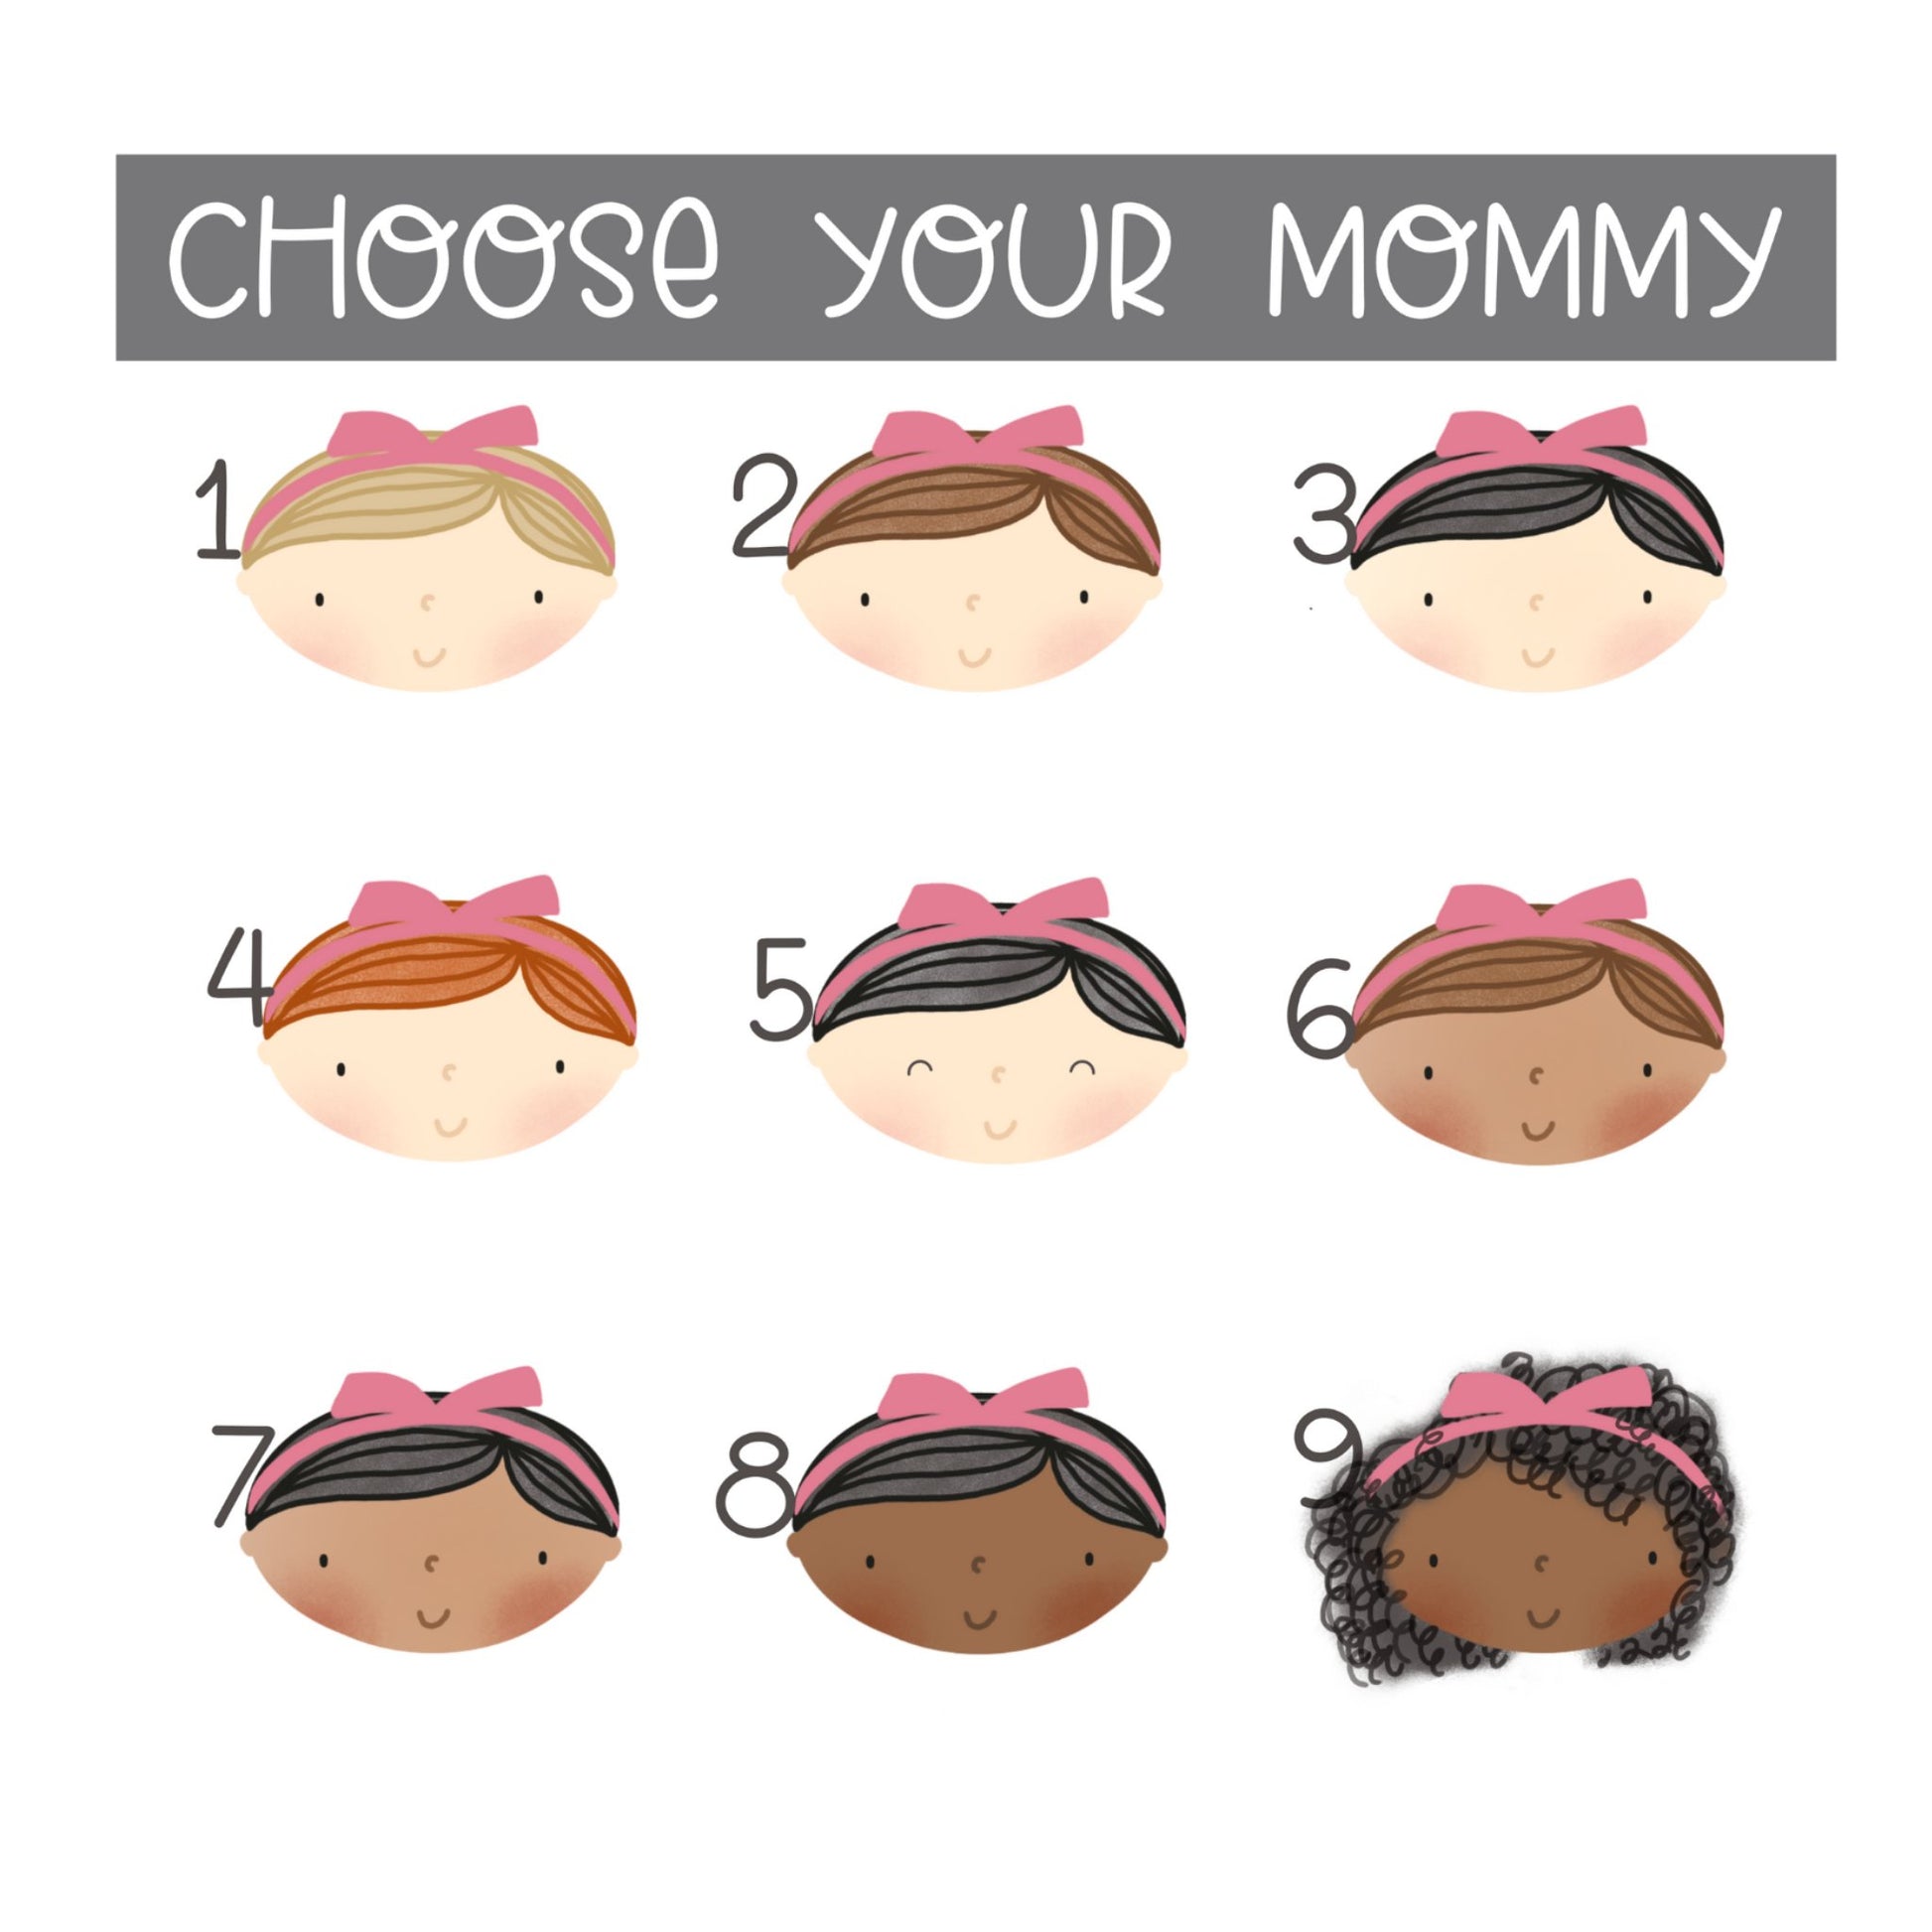 Choose your mommy’s hair and color combination version of the self-published personalized gift- a children’s picture book called “I’m Your Mommy”